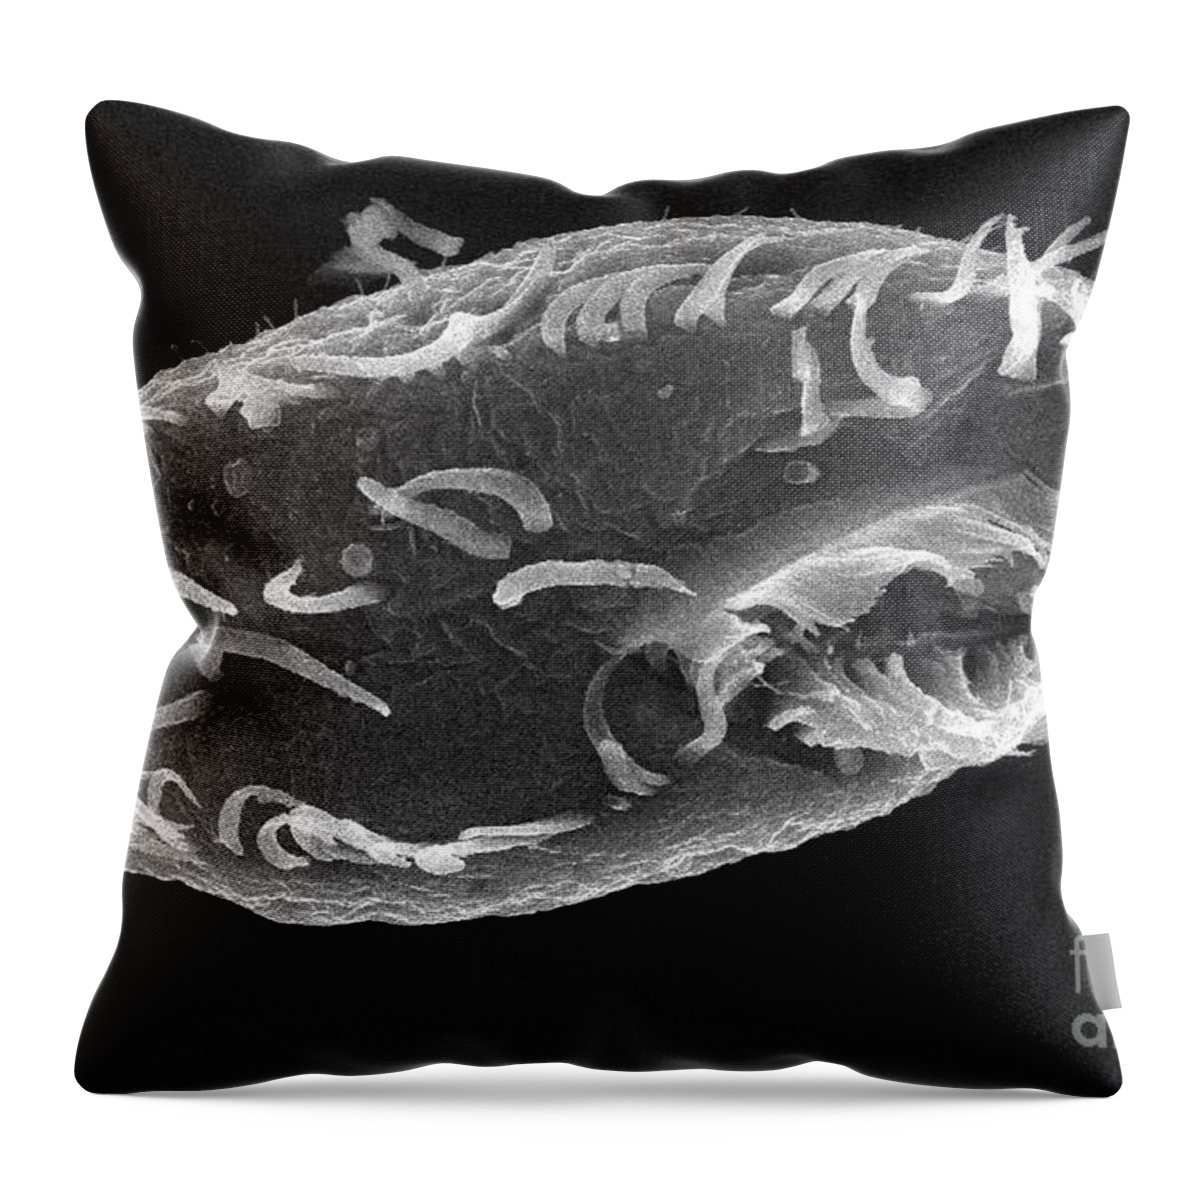 Oxytricha Trifallax Throw Pillow featuring the photograph Oxytricha Trifallax by Science Source